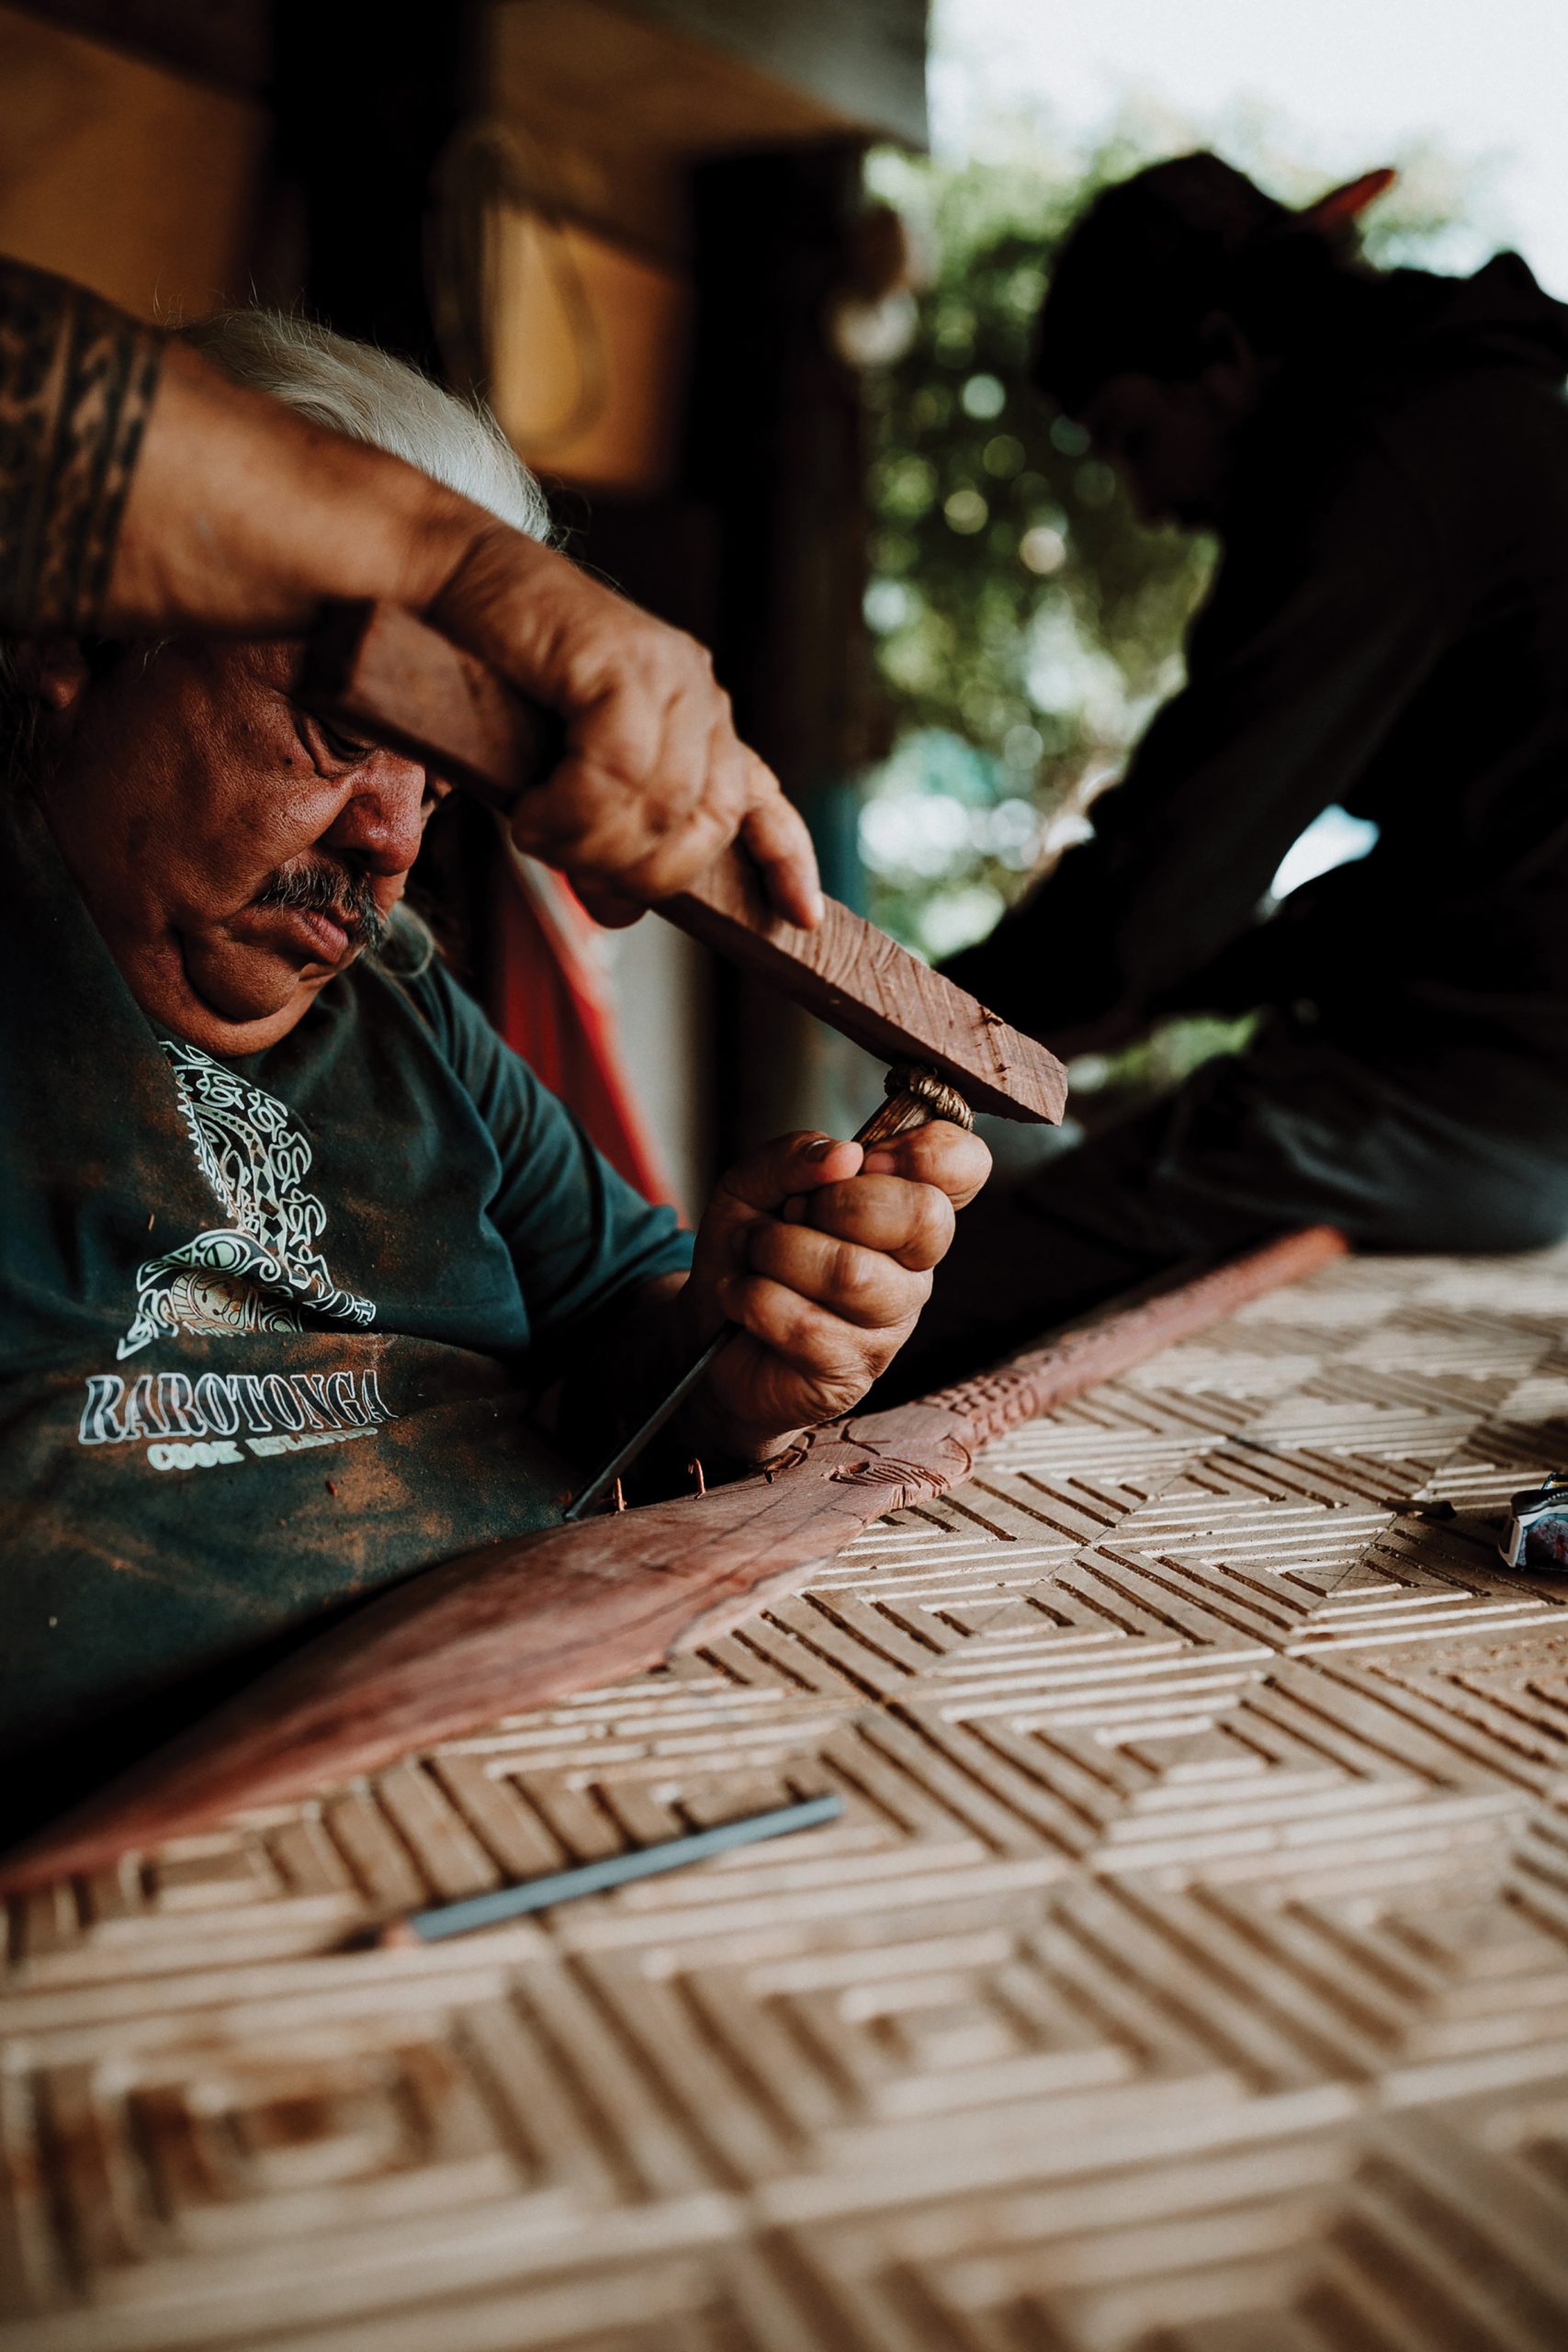     Alex King, Michael Tavioni carving a spear for a buyer, 2019. Courtesy of the artist.

